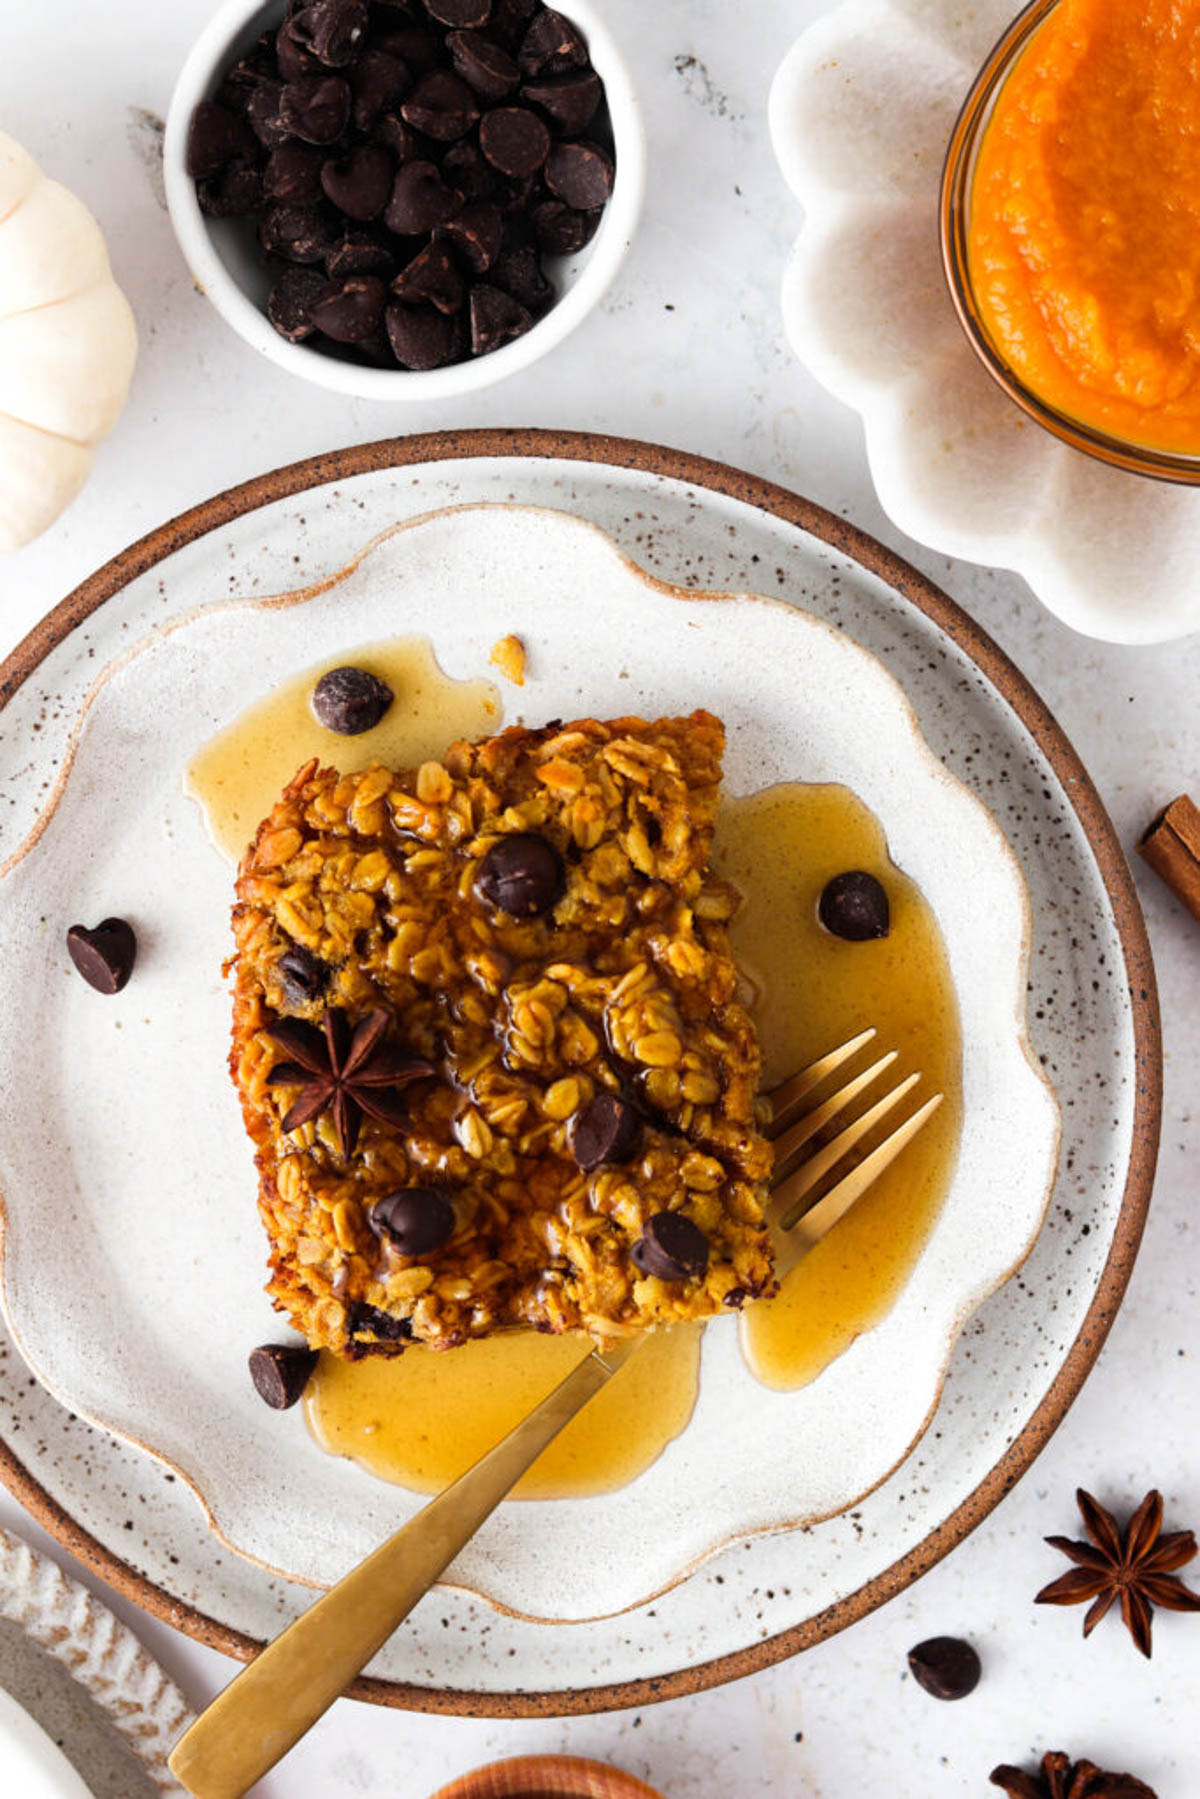 Pumpkin baked oatmeal on a plate with maple syrup and extra chocolate chips.